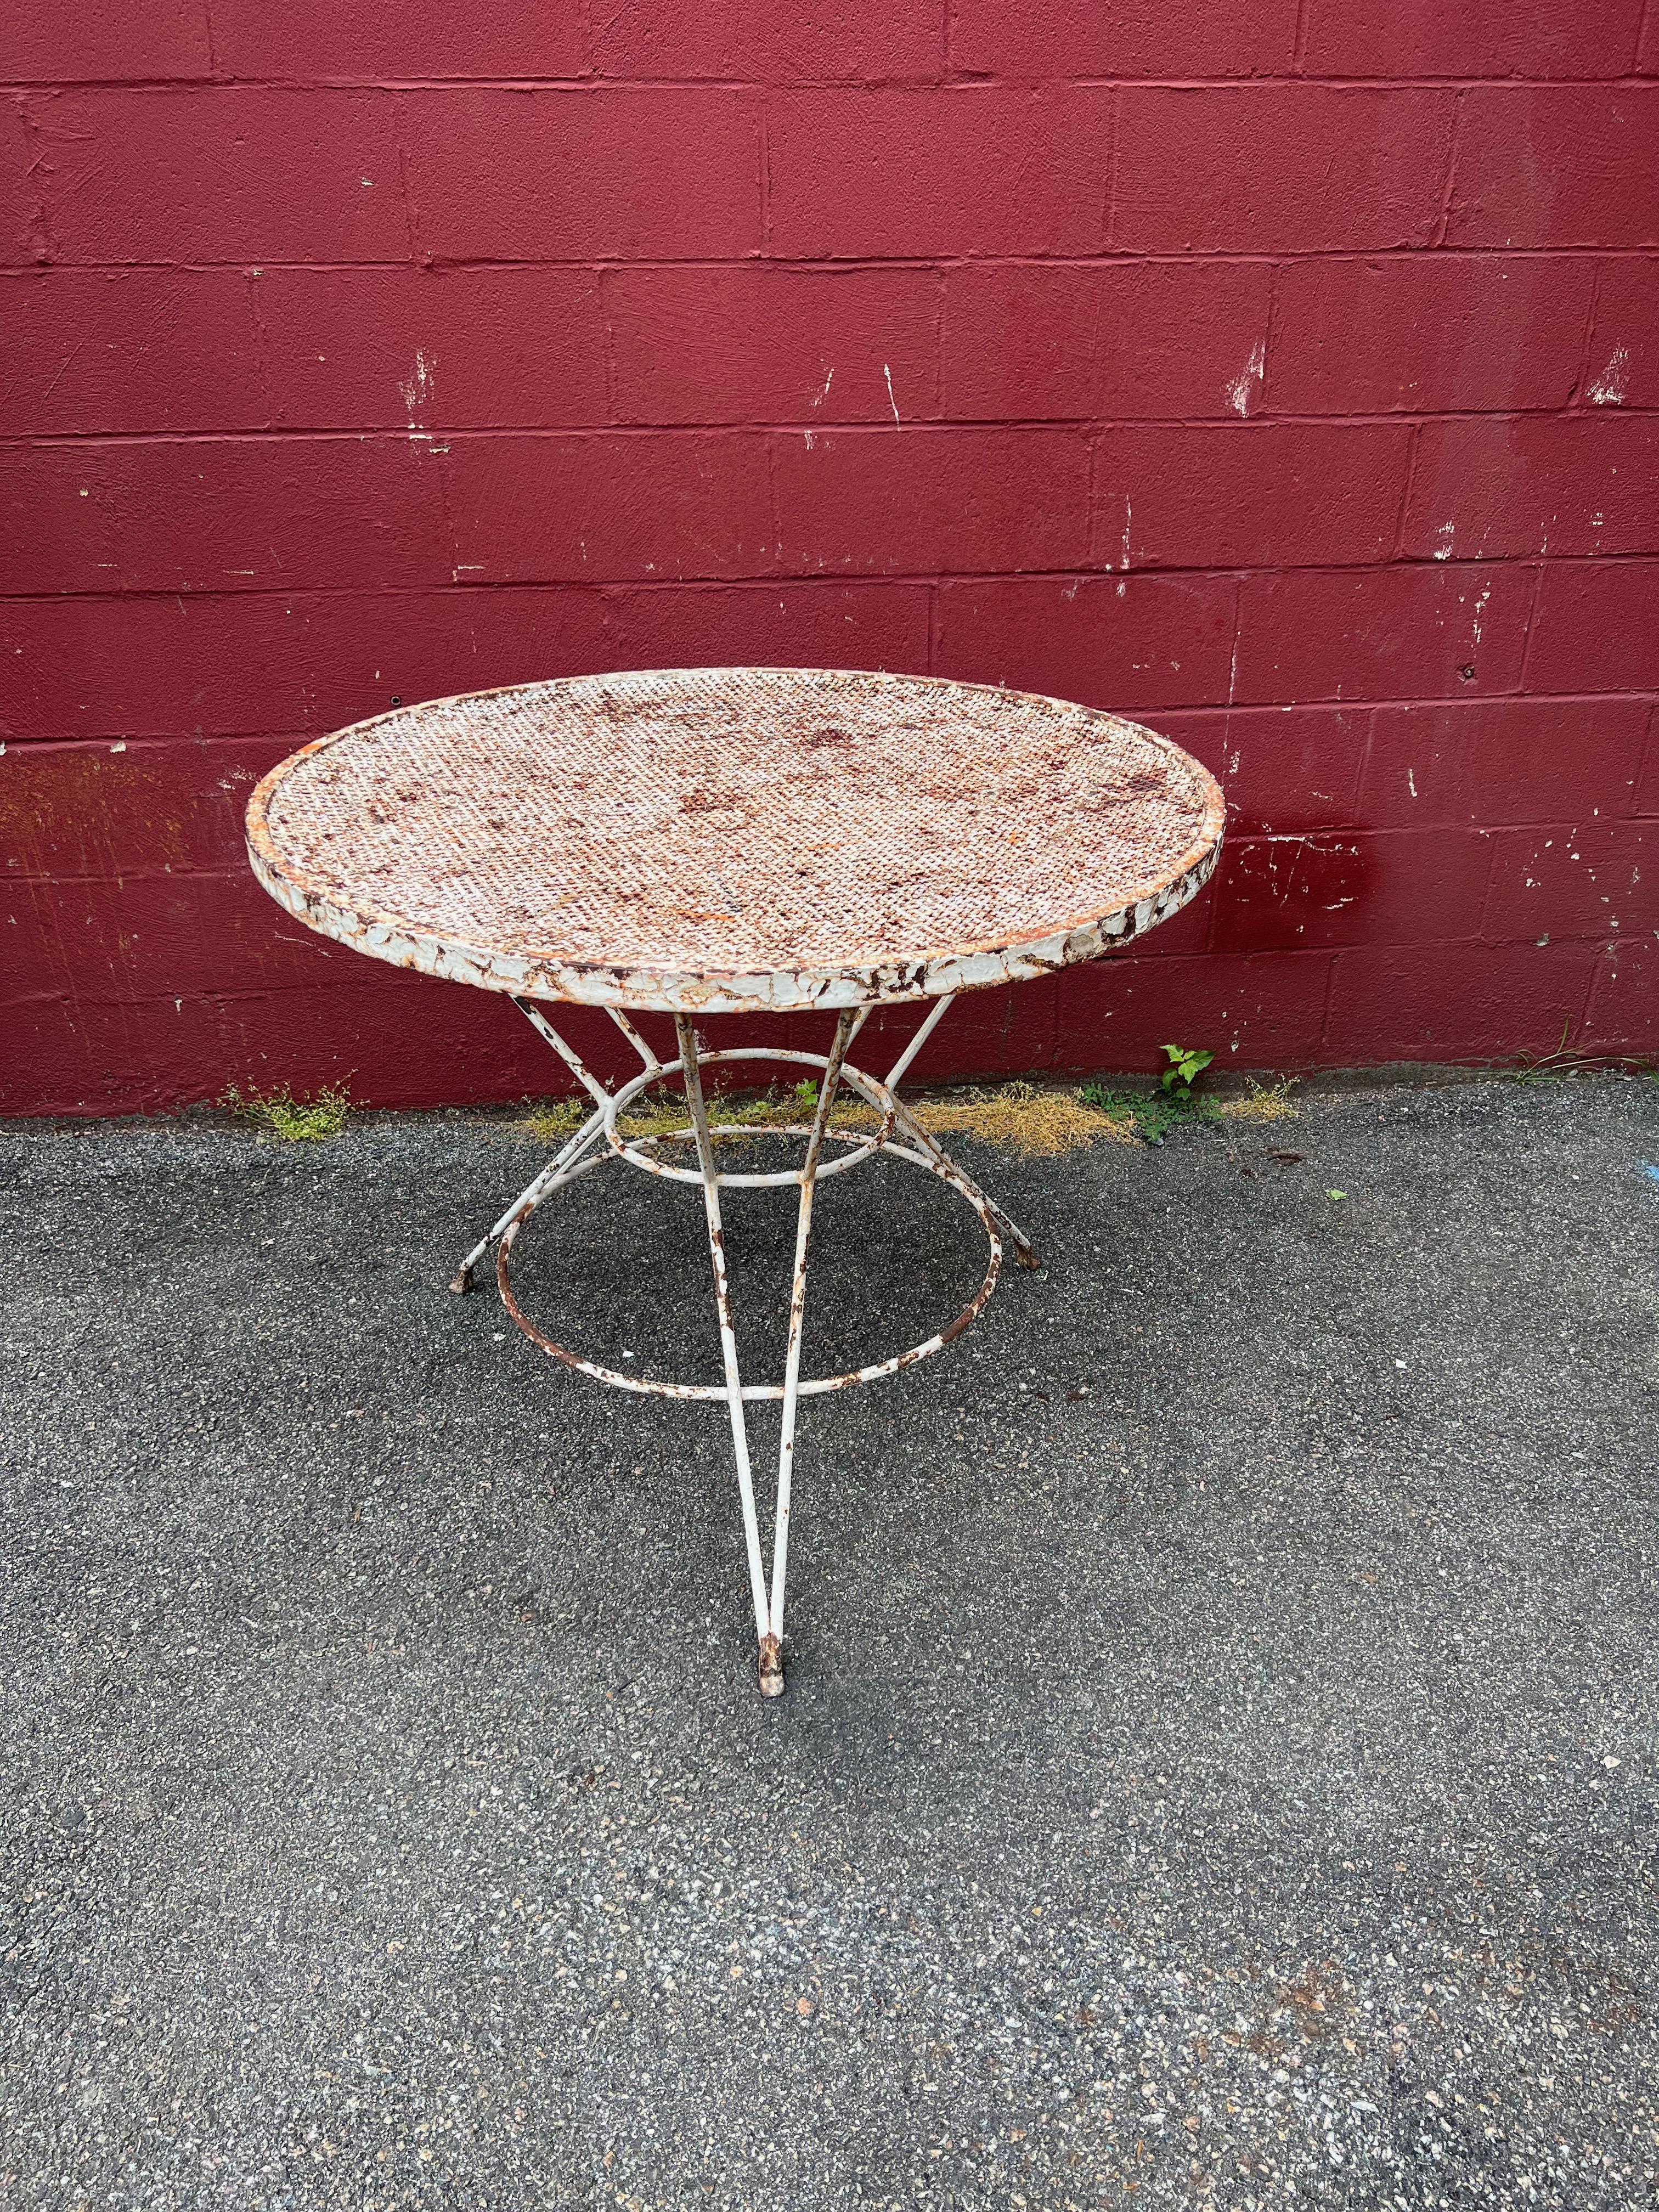 This beautiful French garden table perfectly embodies the mid-century modern style. The distressed paint adds a charming vintage touch, and the perforated top is both elegant and functional. The tripod base with a smaller upper circle and a larger